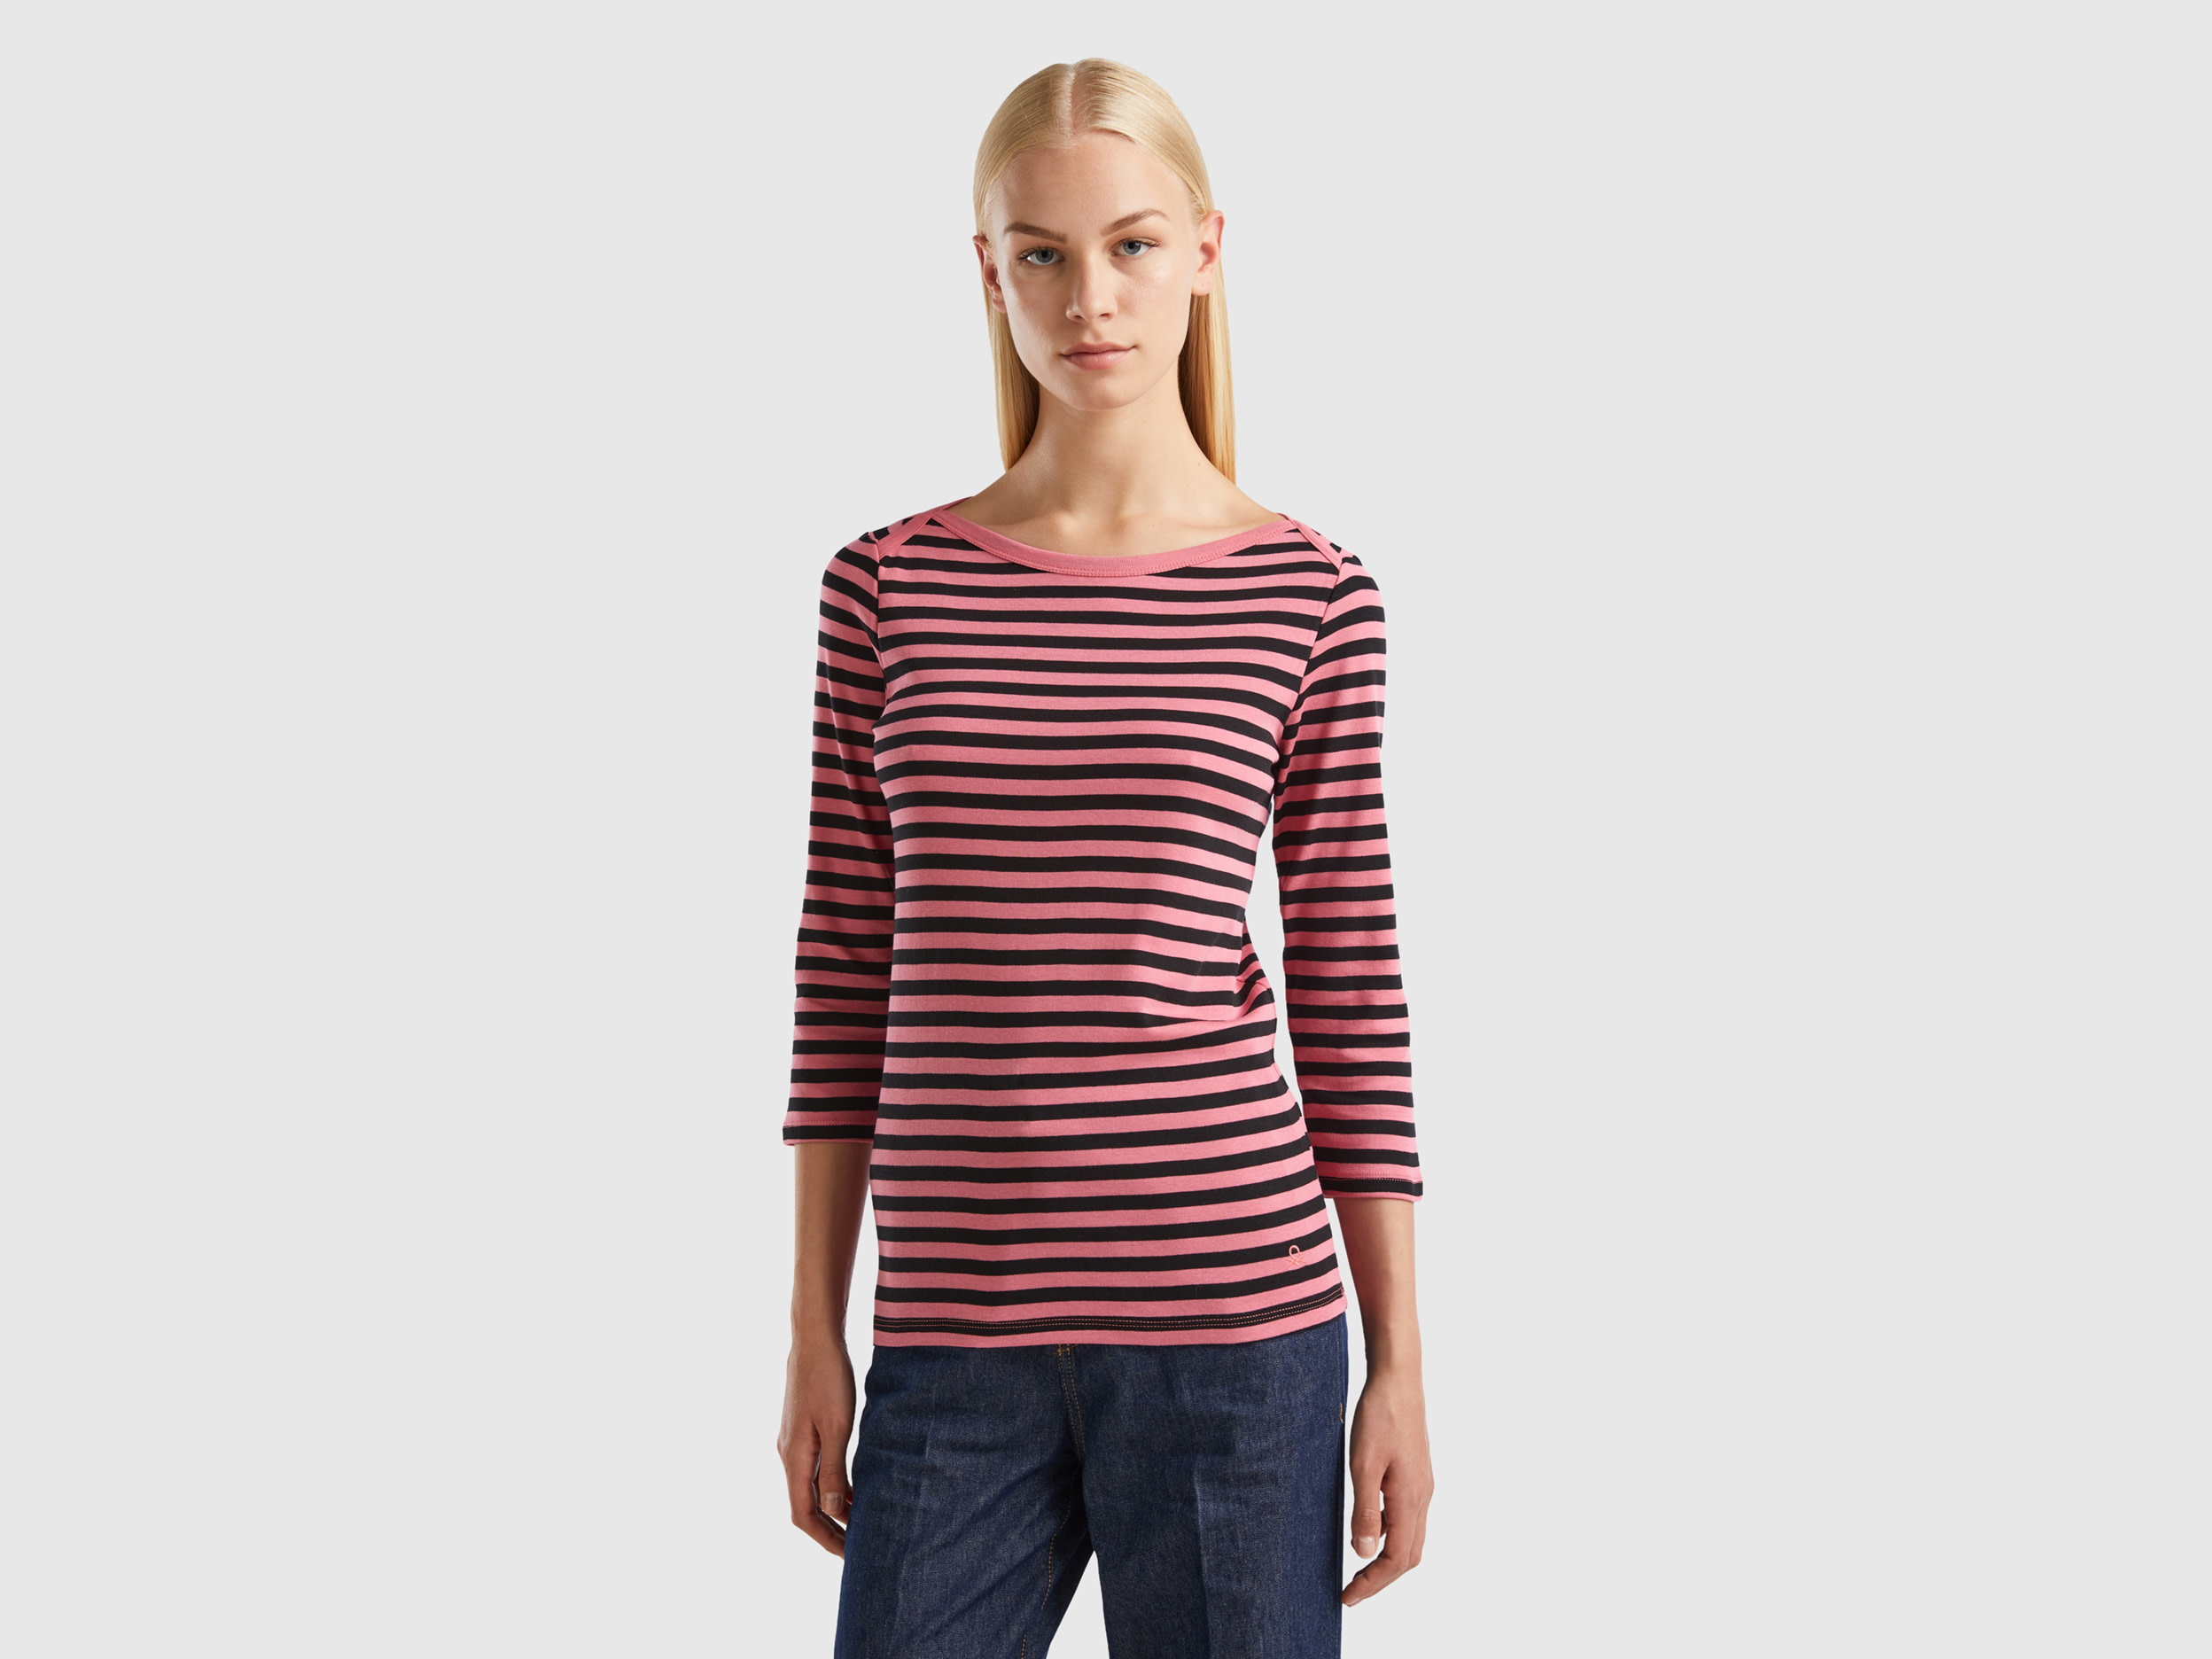 Benetton, Striped 3/4 Sleeve T-shirt In 100% Cotton, size S, Pink, Women